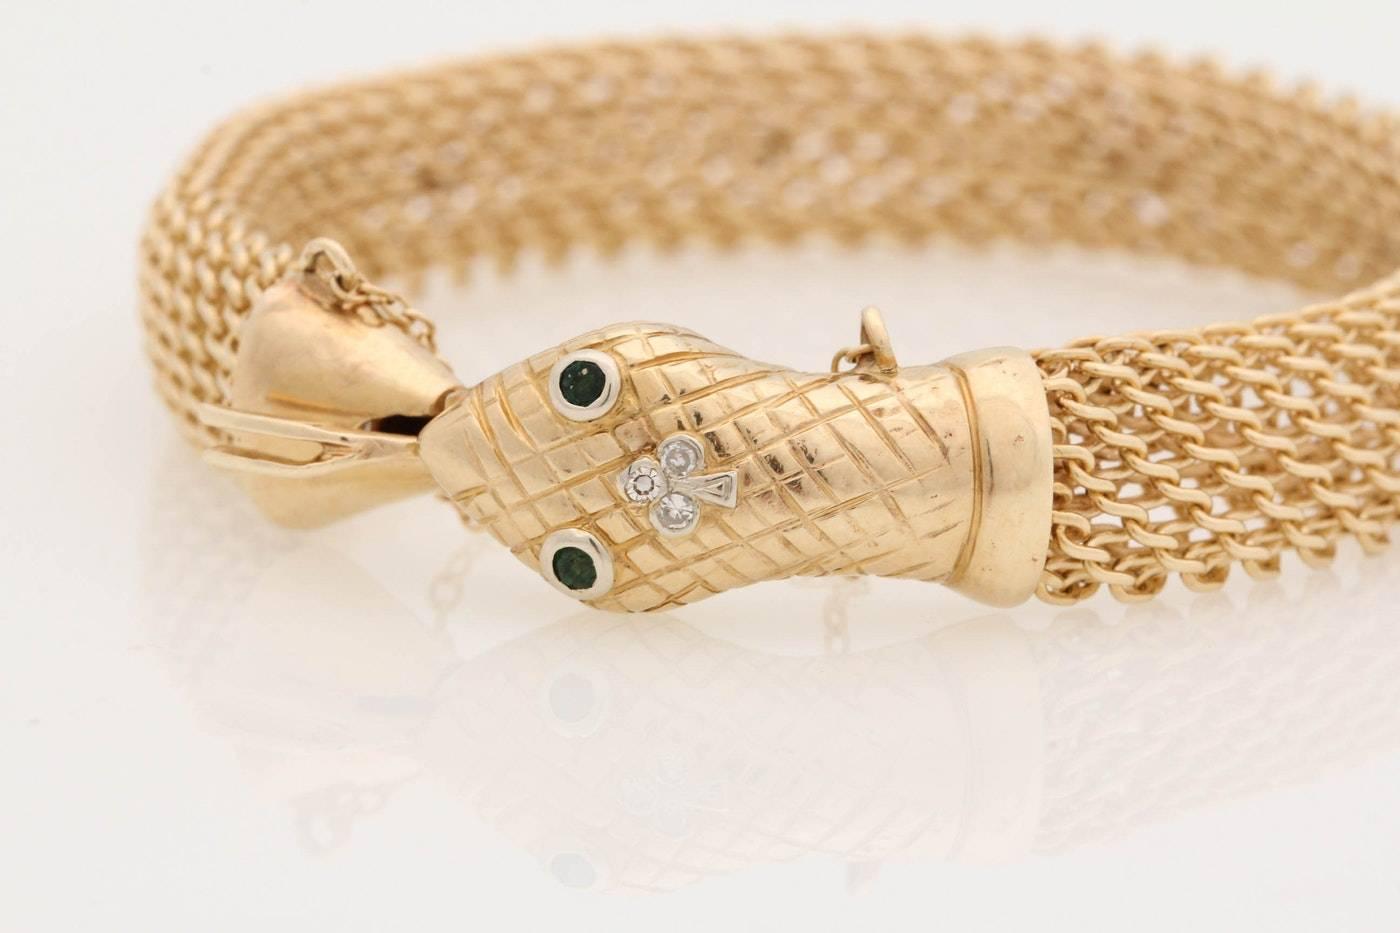 Beautiful vintage 14-karat yellow gold diamond and emerald snake bracelet. This bracelet displays the concept of infinity or wholeness as symbolized by the snake swallowing its tail

Metal type: 14-karat yellow gold
Bracelet length: